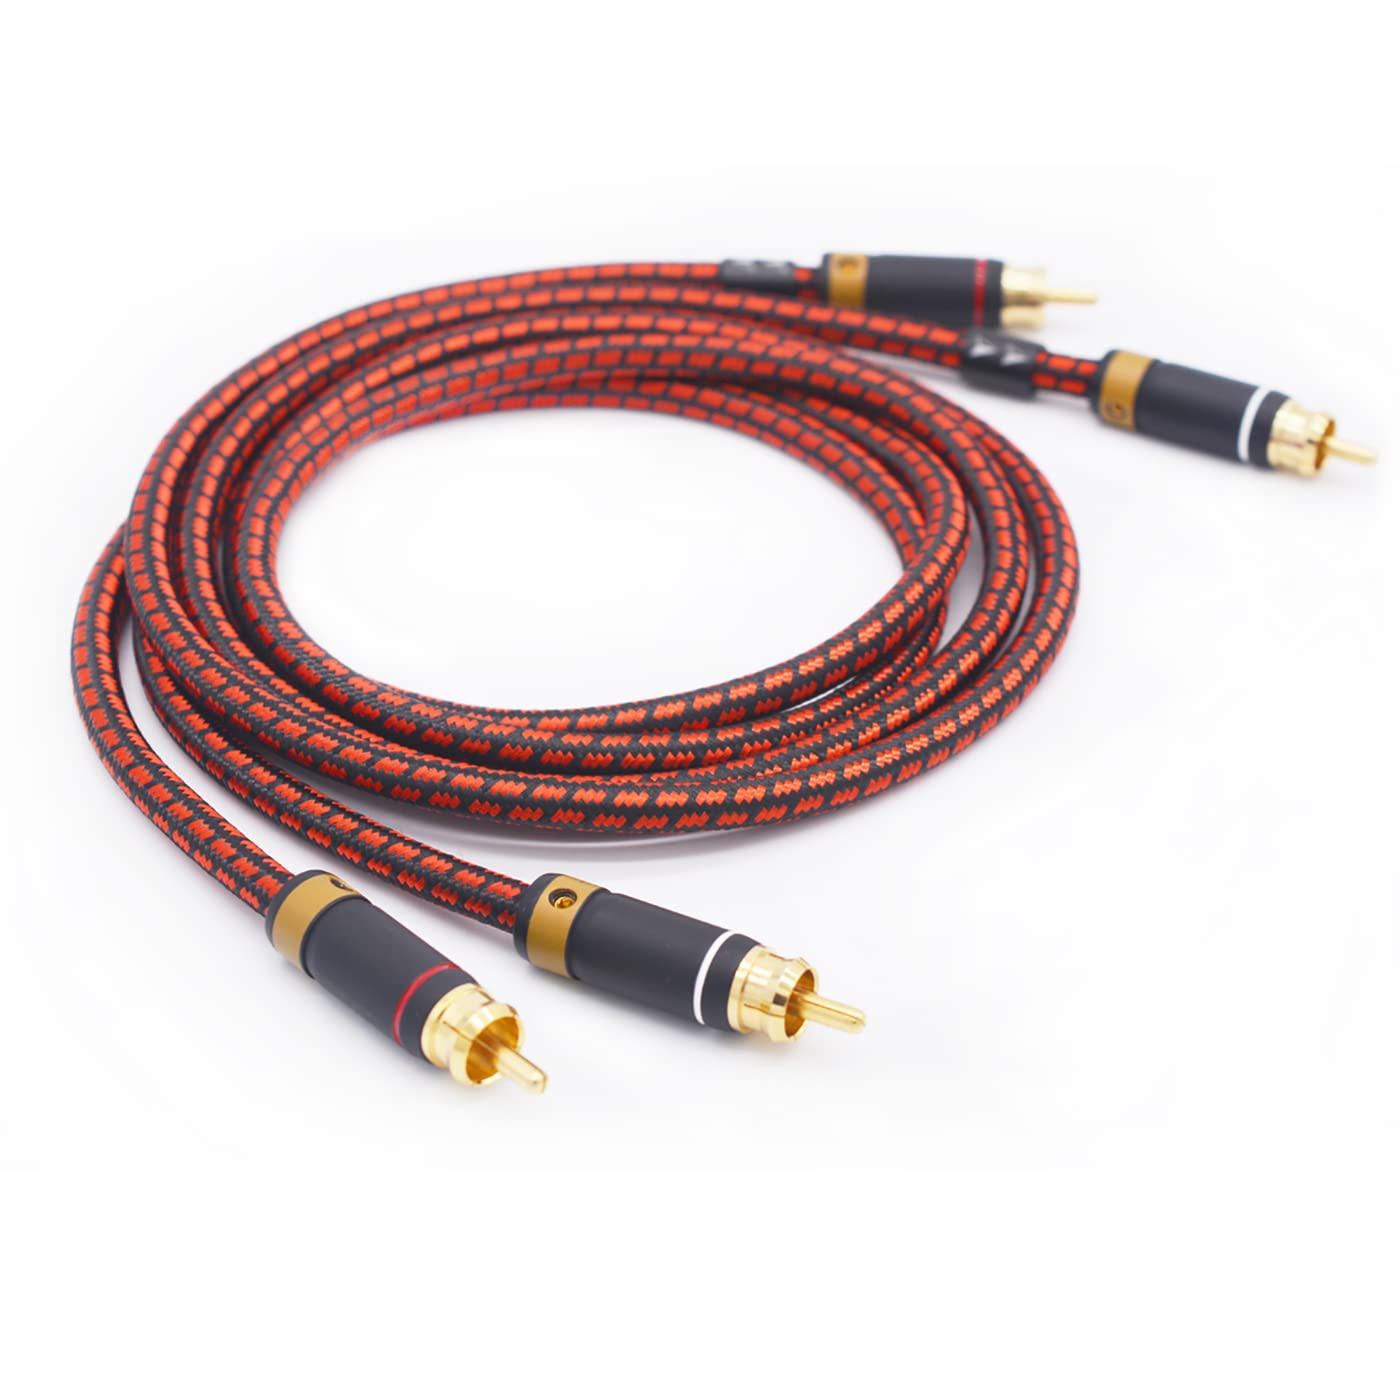 Audiophile RCA Cable, 2 RCA Male to 2 RCA Male Stereo [...]